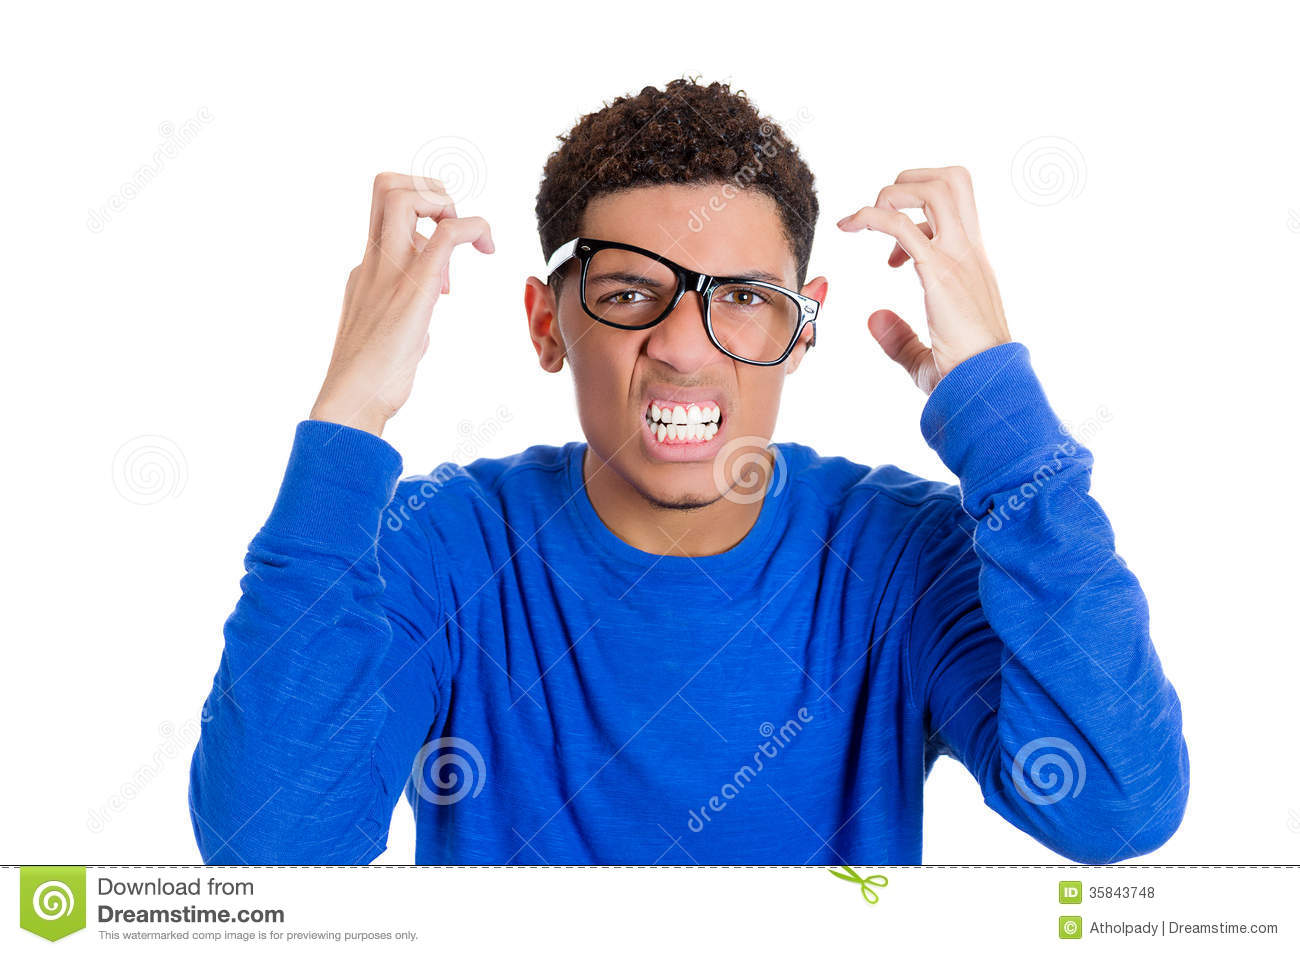 Angry Nerdy Student With Hands Raised Teeth Clenched Royalty Free